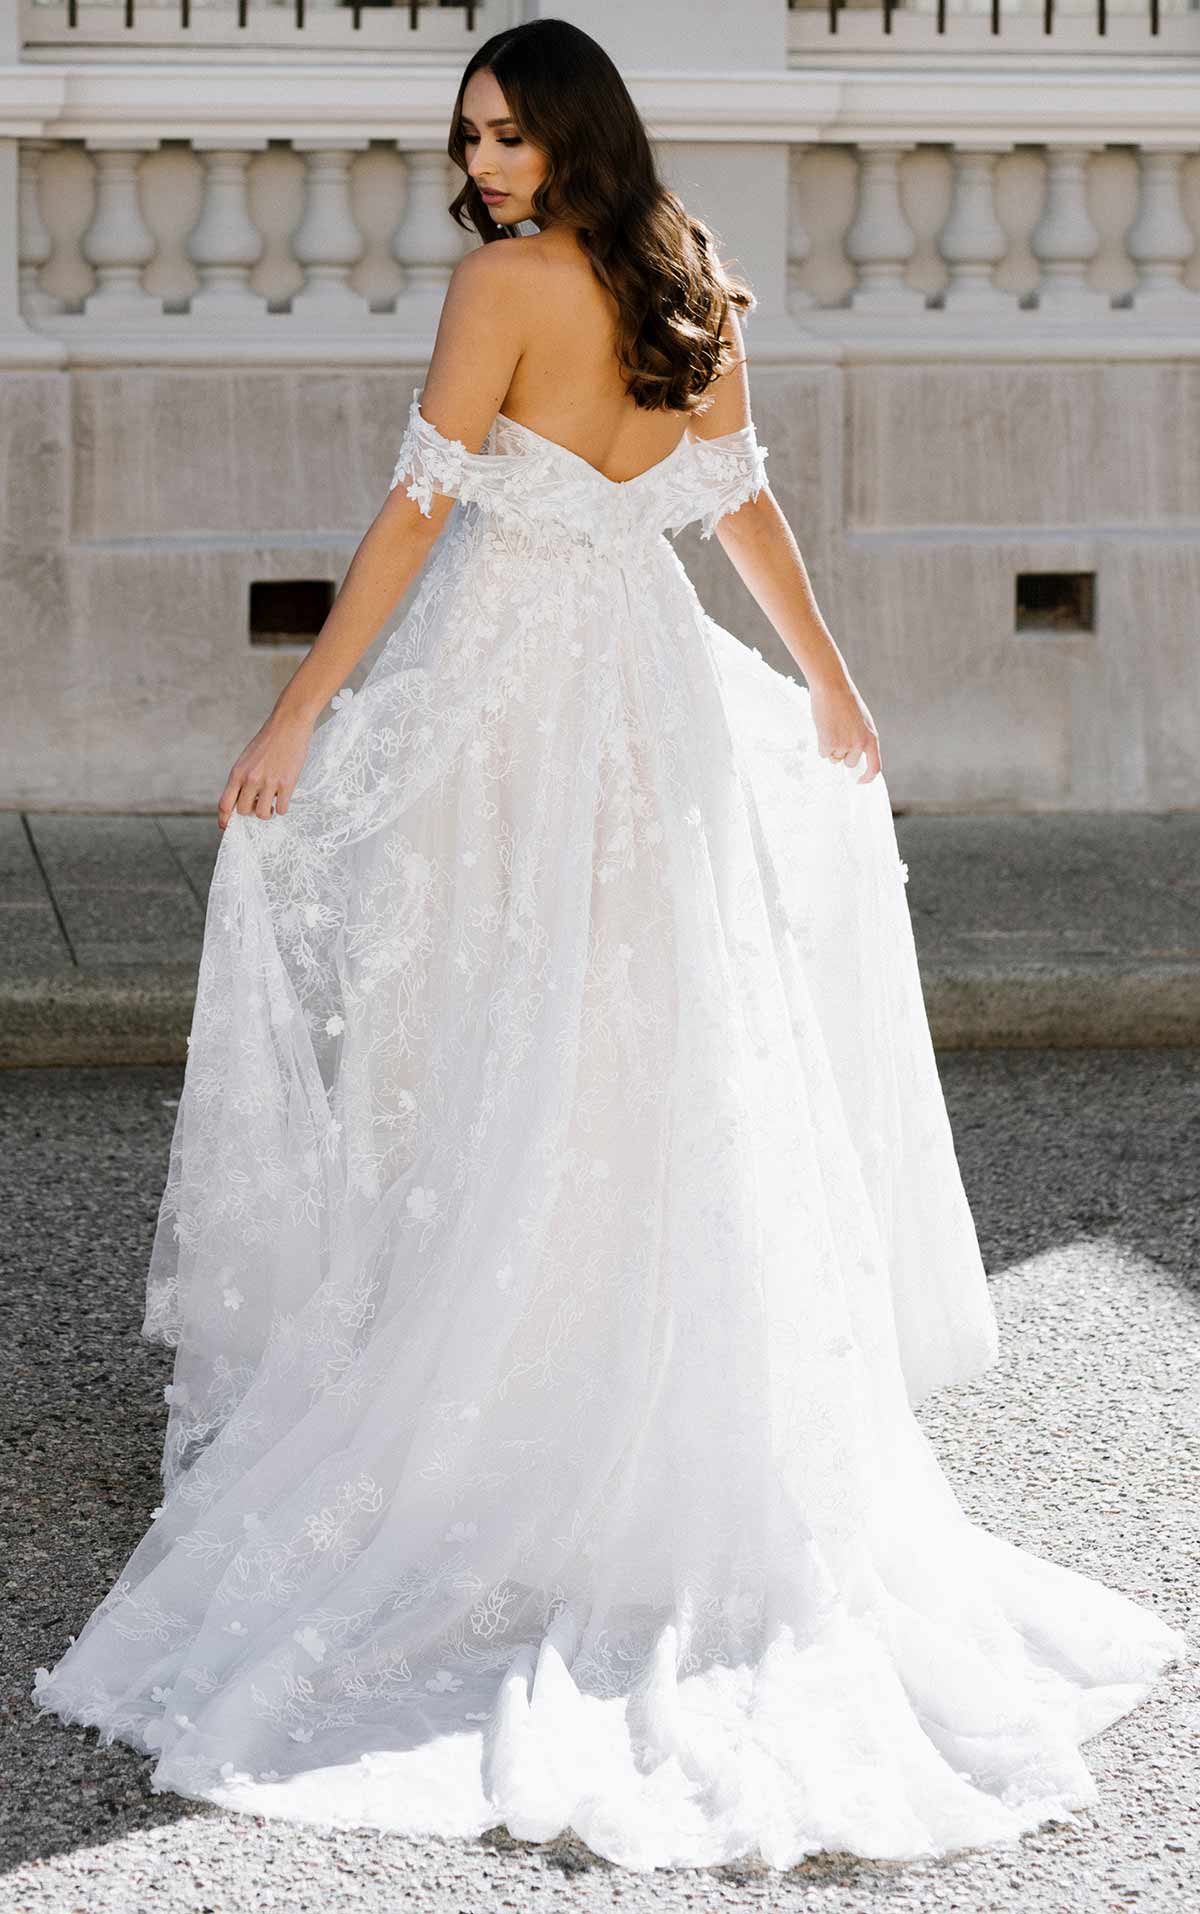 Martina Liana - GORGEOUS WEDDING DRESS WITH BEADED DETAILS AND